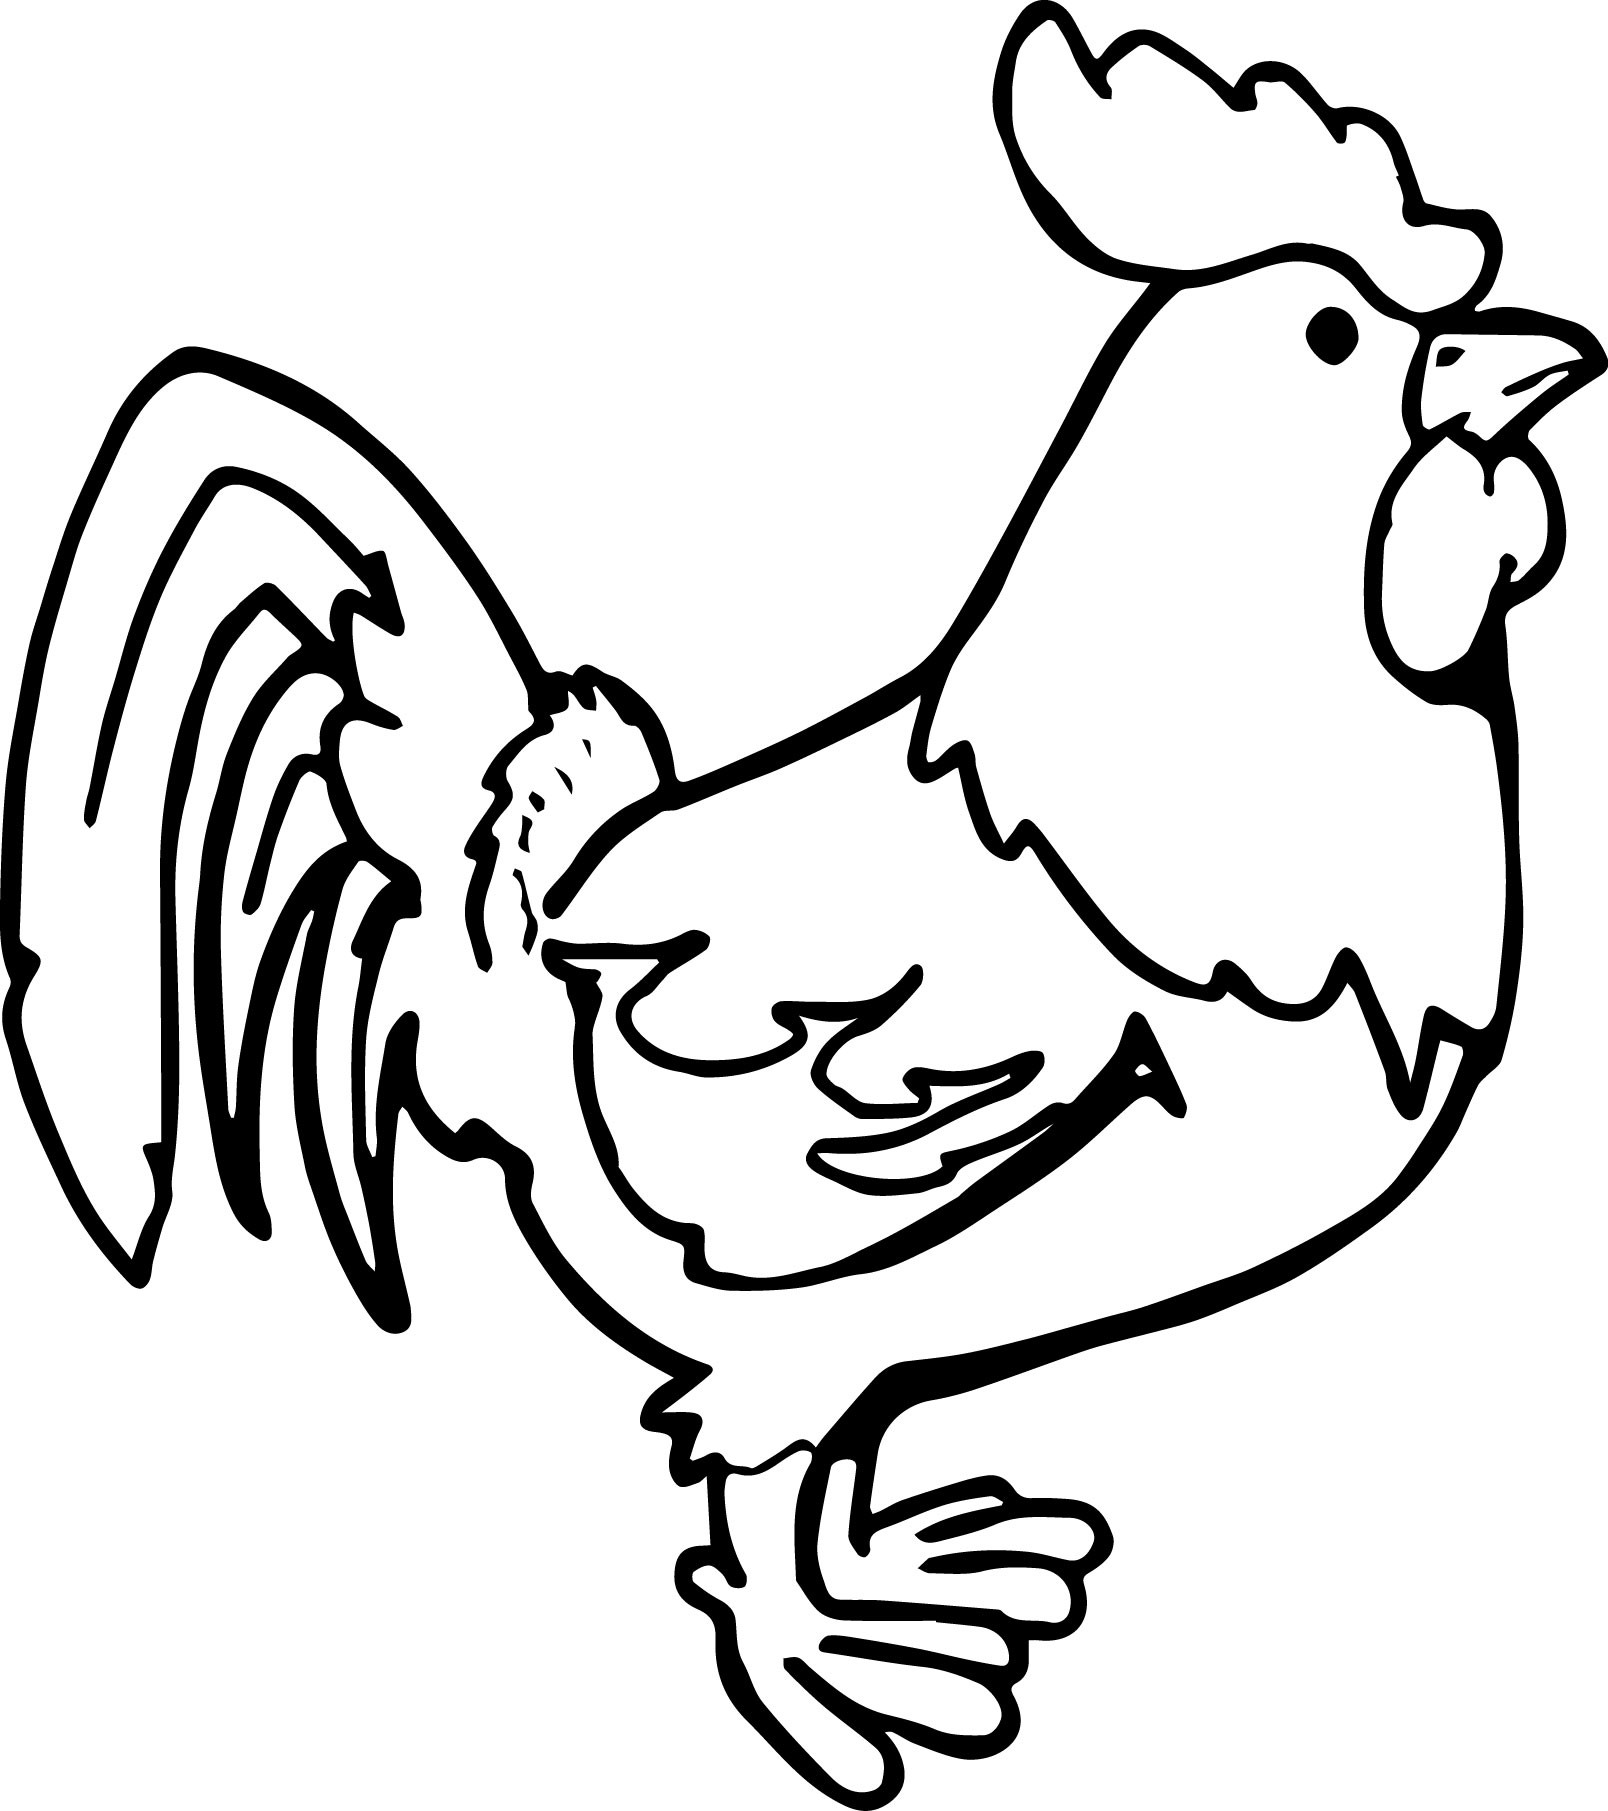 Chicken Coloring Pages For Adults
 Chicken Coloring Pages Best Coloring Pages For Kids